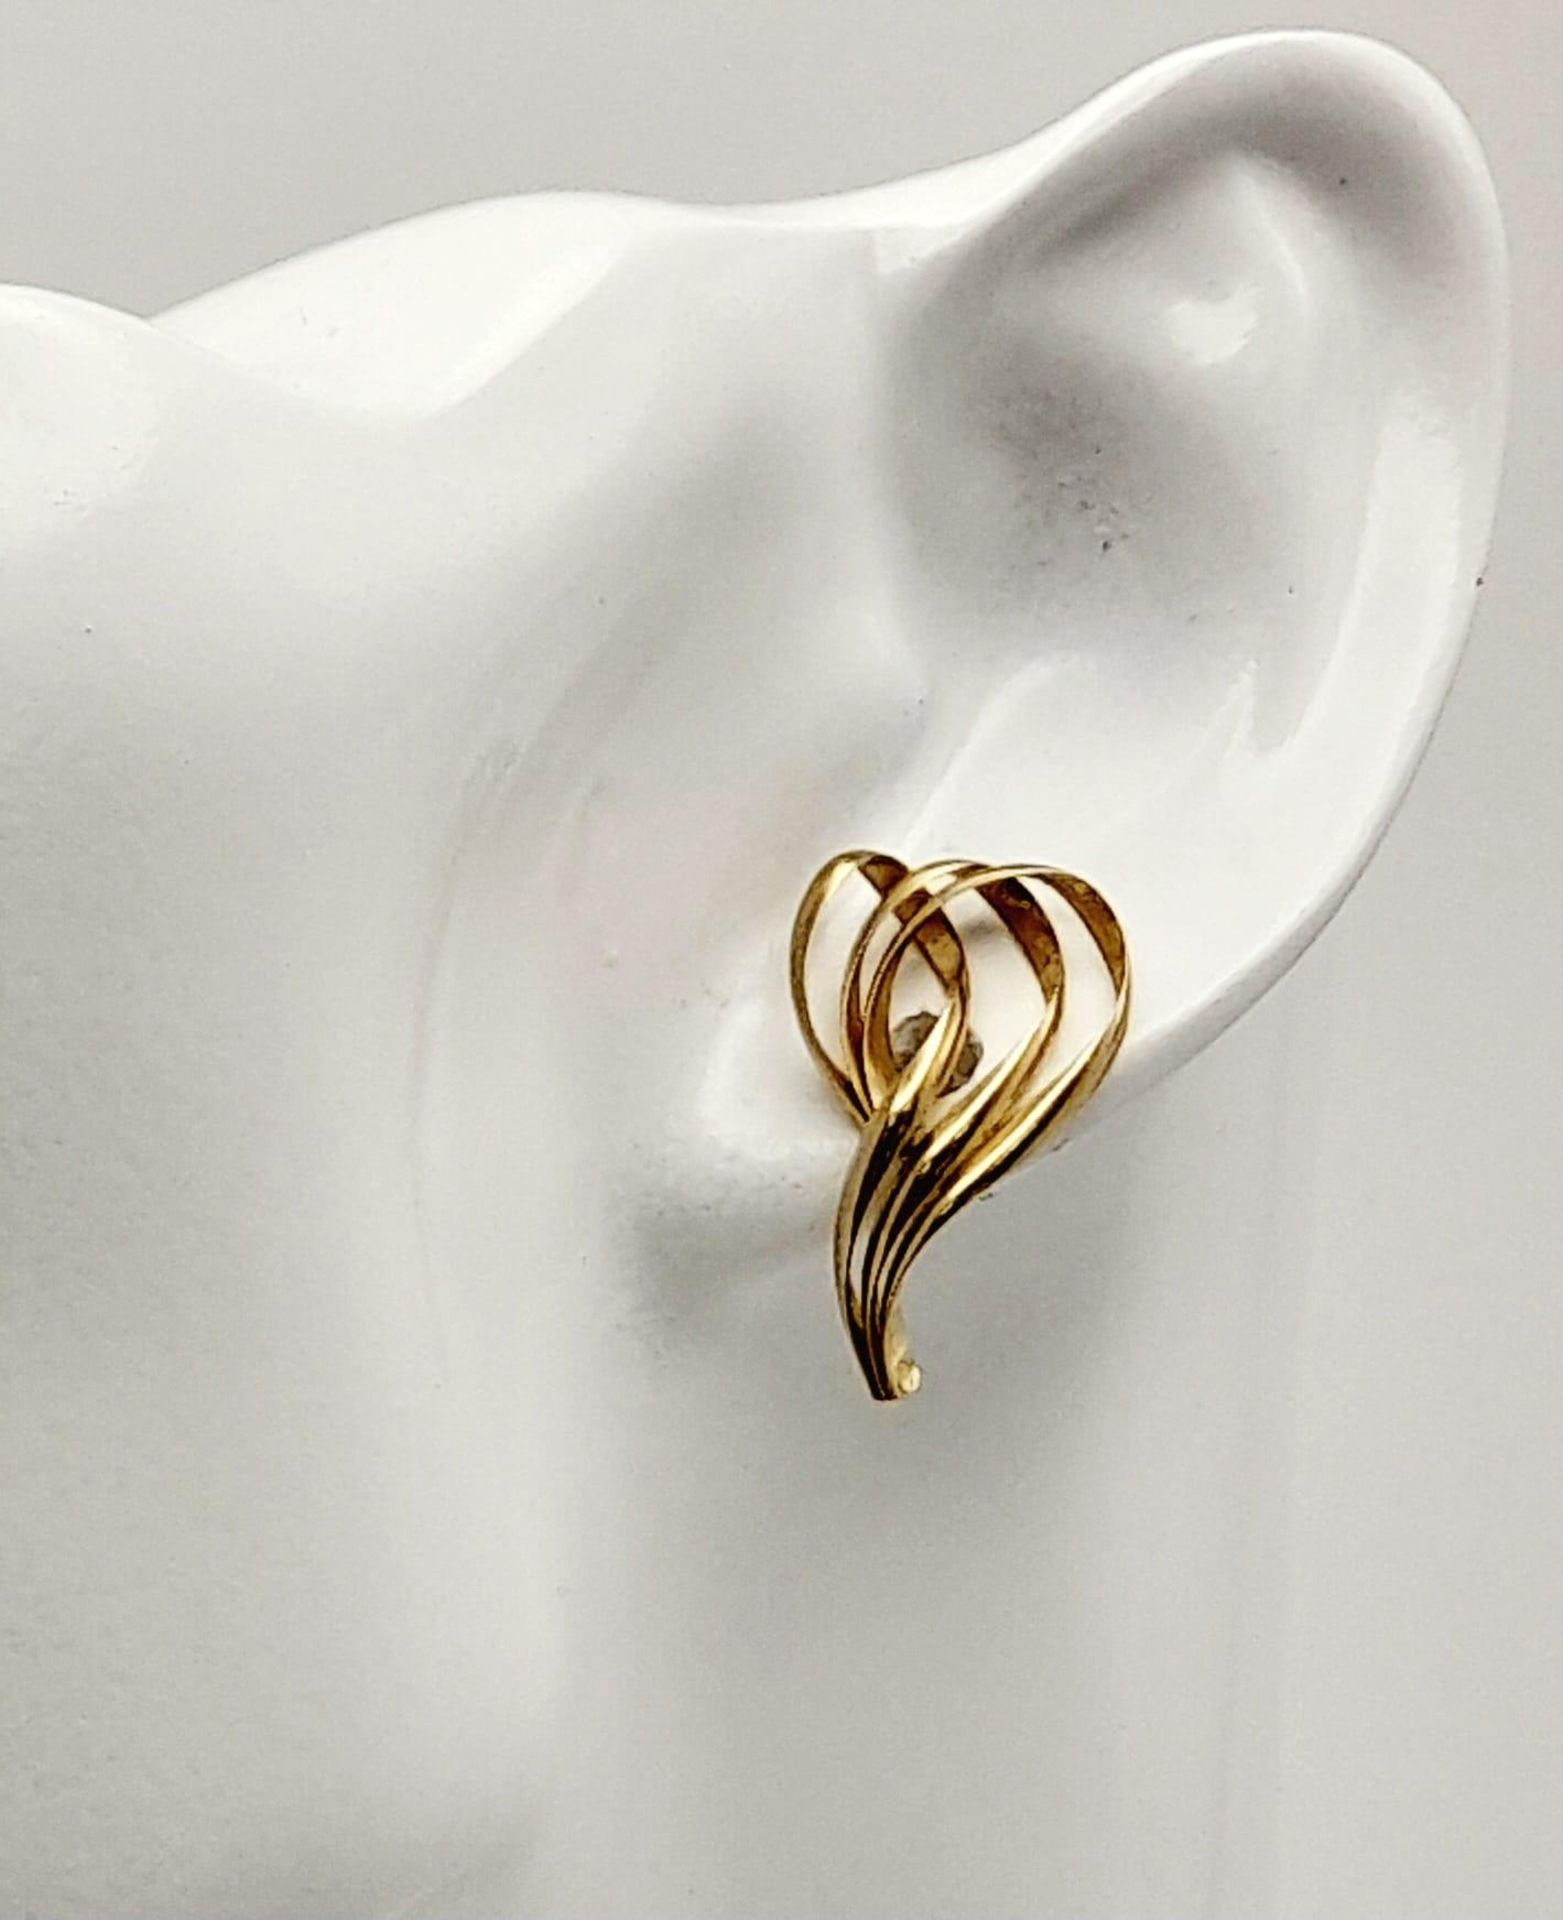 A Pair of 9K Yellow Gold Swirl Earrings. 2.55g total weight. - Image 7 of 11